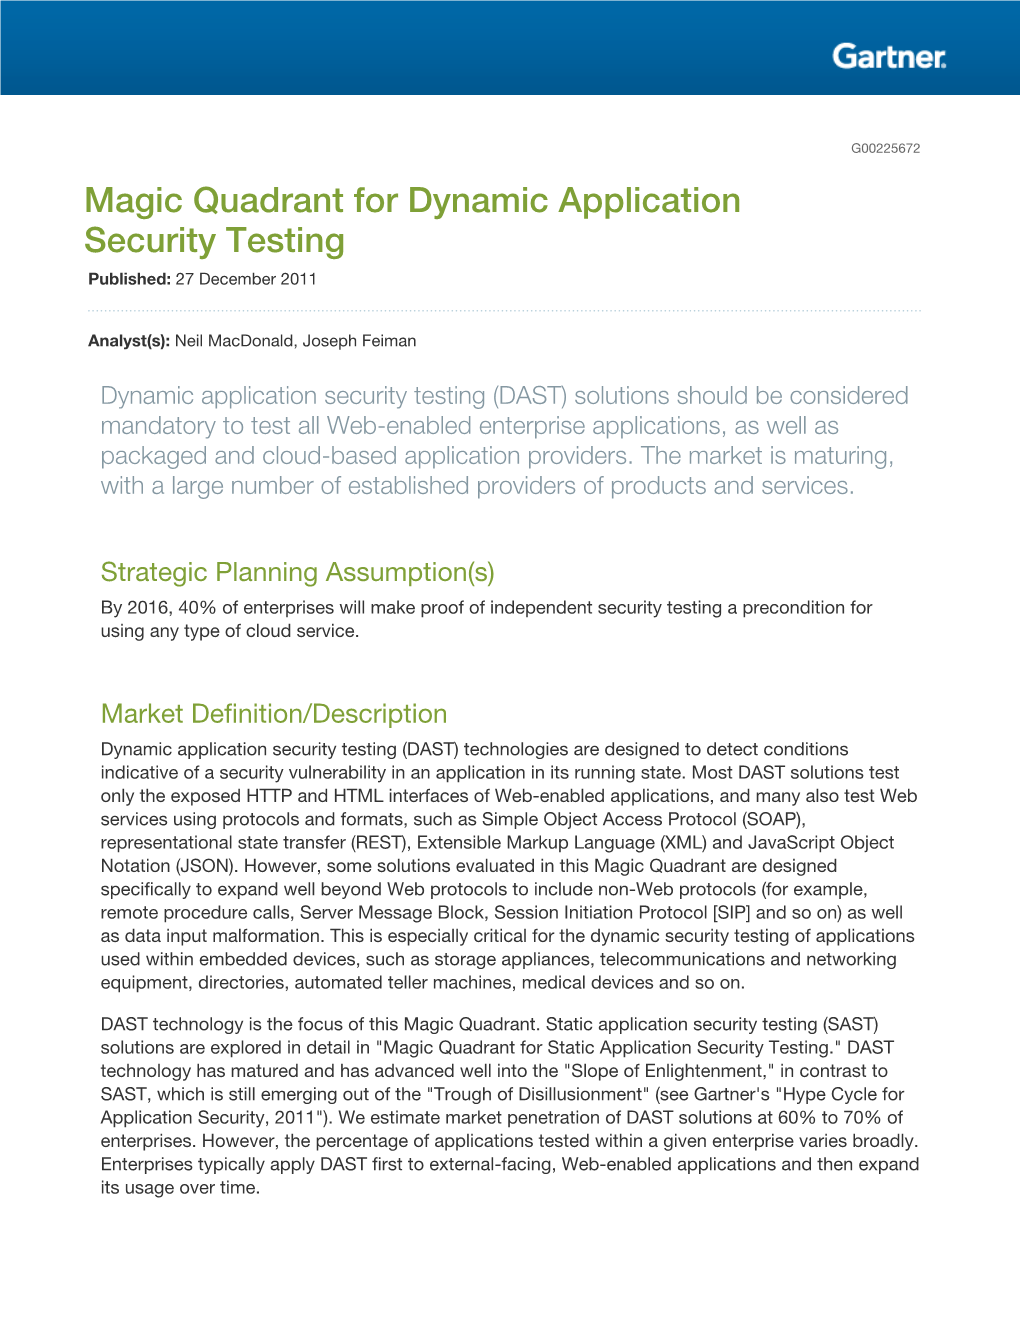 Magic Quadrant for Dynamic Application Security Testing Published: 27 December 2011